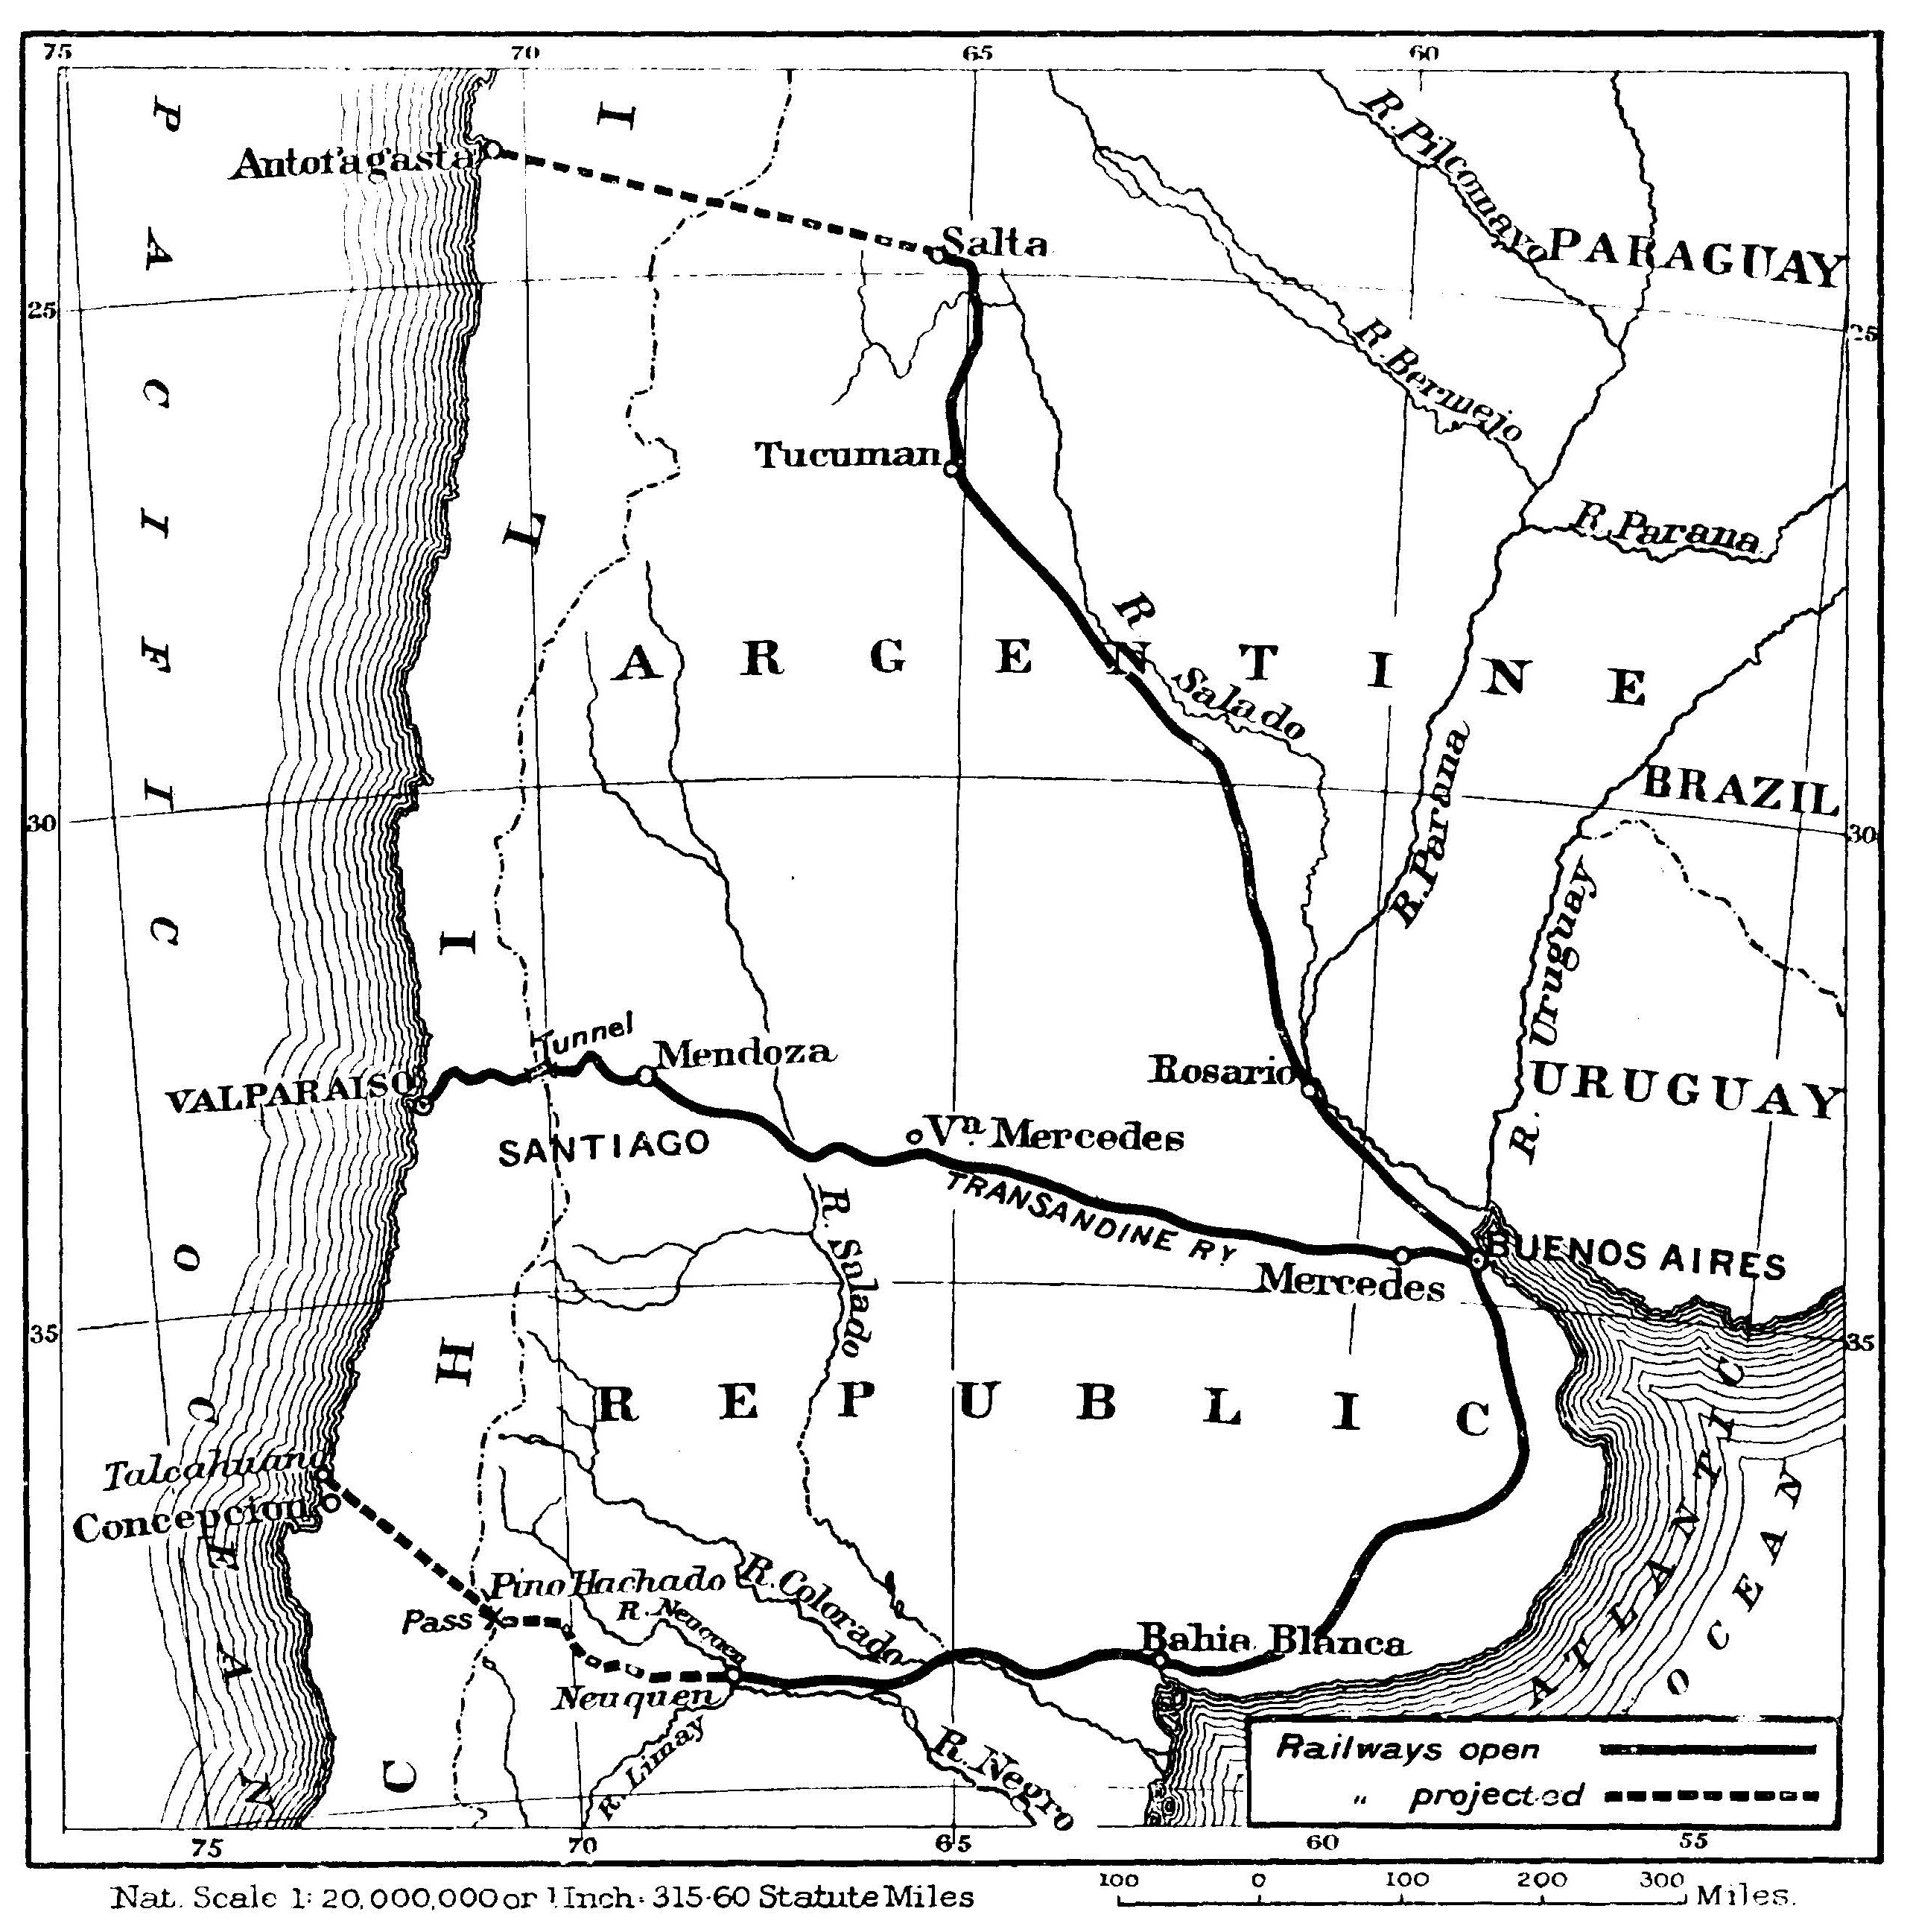 Map of the Transandine Railway between Buenos Aires and Valparaíso. (Source: Barclay, “The First Transandine Railway.”)